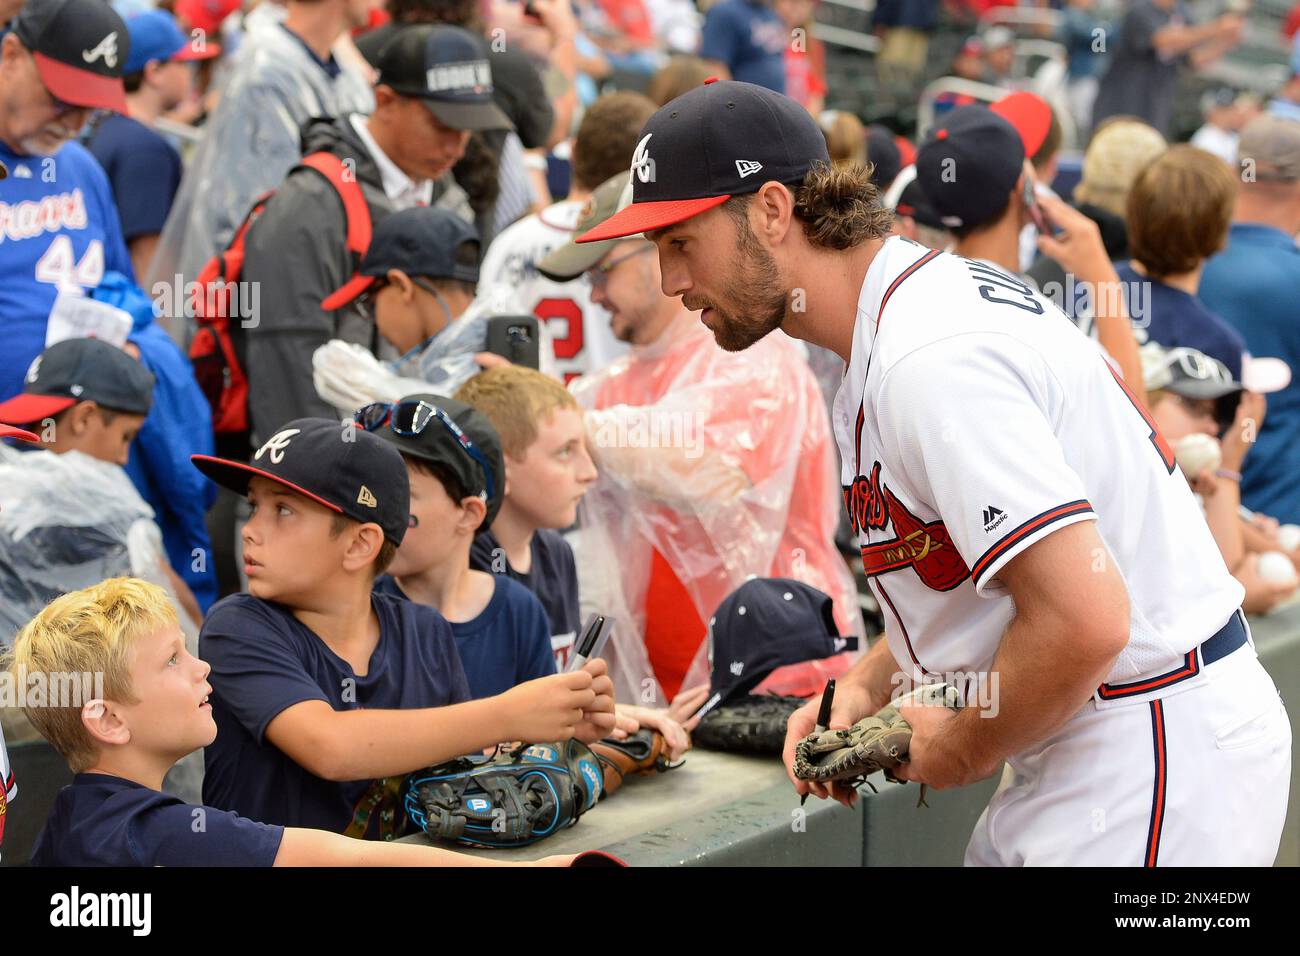 ATLANTA, GA – JUNE 01: Atlanta's Charlie Culberson (16) signs autographs  for fans prior to the start of the game between Atlanta and Washington on  June 1st, 2018 at SunTrust Park in